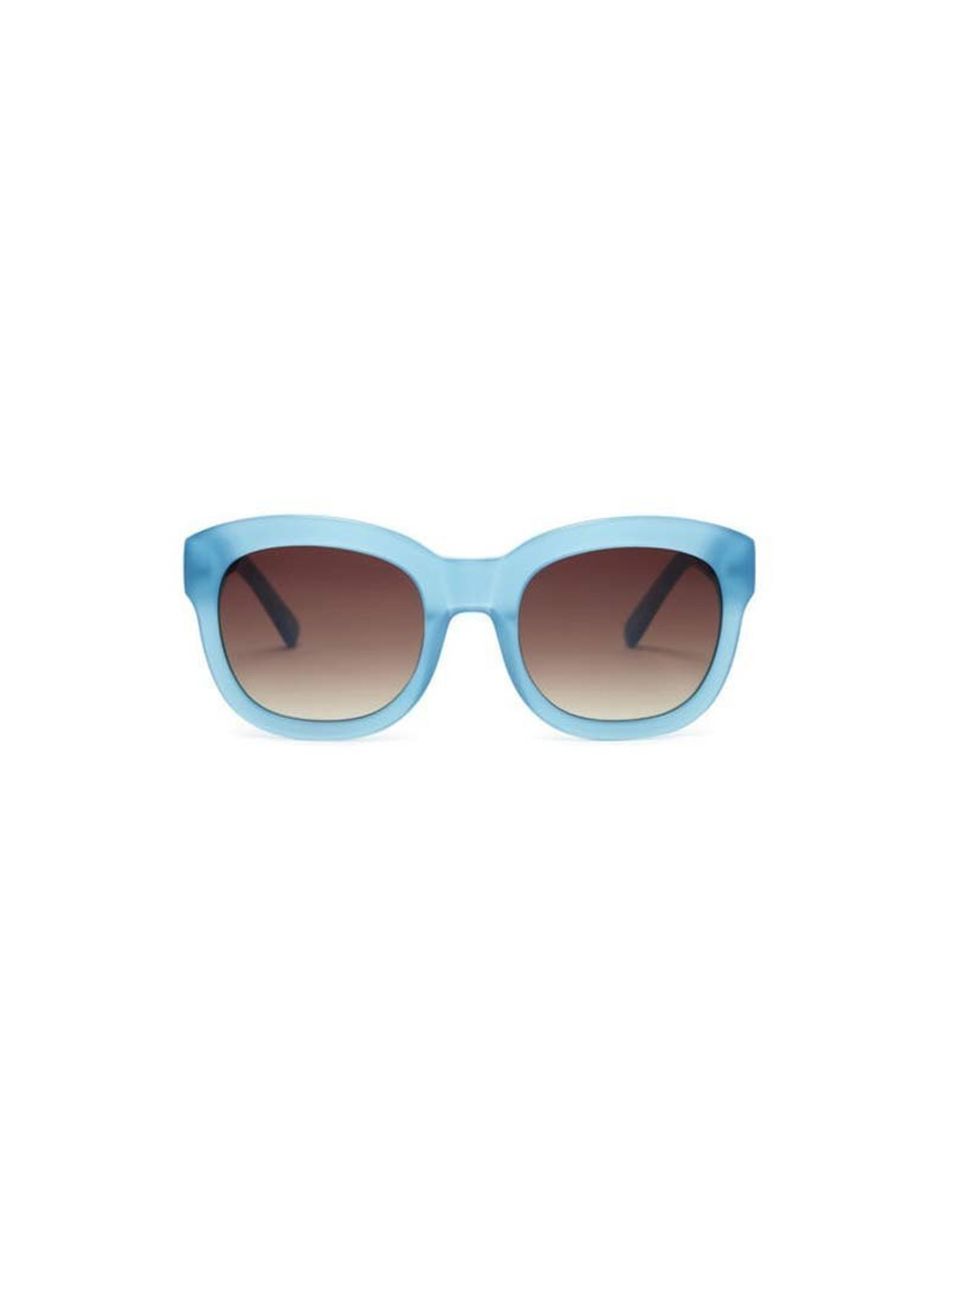 <p>Executive Fashion and Beauty Director Kirsty Dale chose...</p><p><a href="http://www.whistles.com/women/sale/accessories/ali-heavy-frame-sunglasses.html?dwvar_ali-heavy-frame-sunglasses_color=Blue">Whistles</a> sunglasses, were £70 now £35</p>